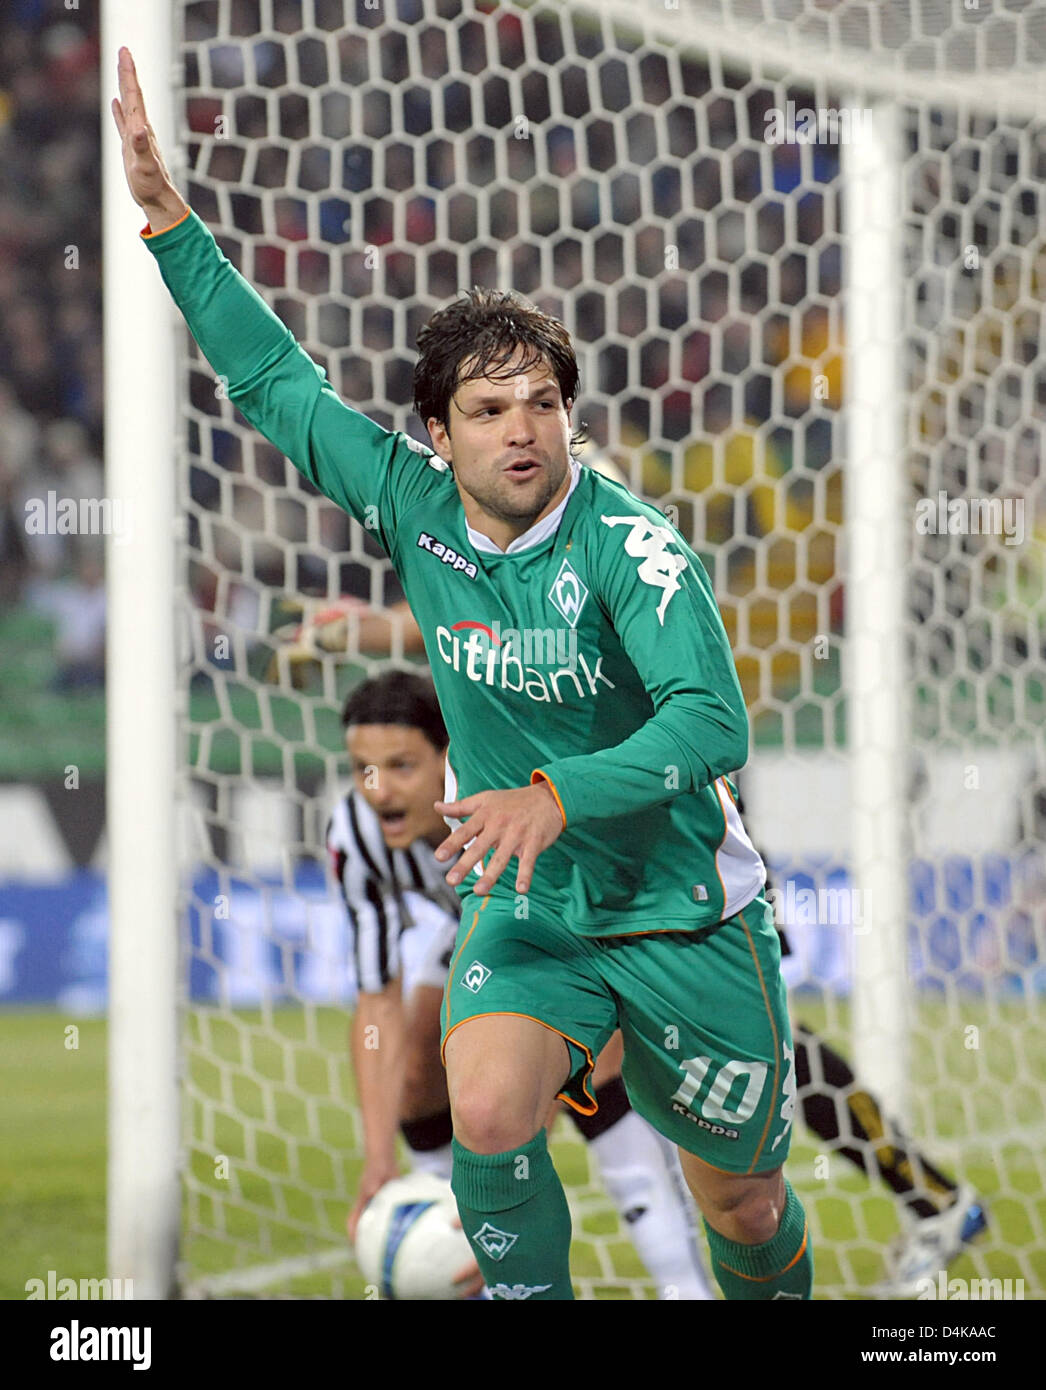 Bremen?s Diego cheers after his second goal to 3-2 during the UEFA Cup quarter finals second leg match Udinese vs Werder Bremen at Stadio Friuli in Udine, Italy, 16 April 2009. The match tied 3-3. Photo: Carmen Jaspersen Stock Photo